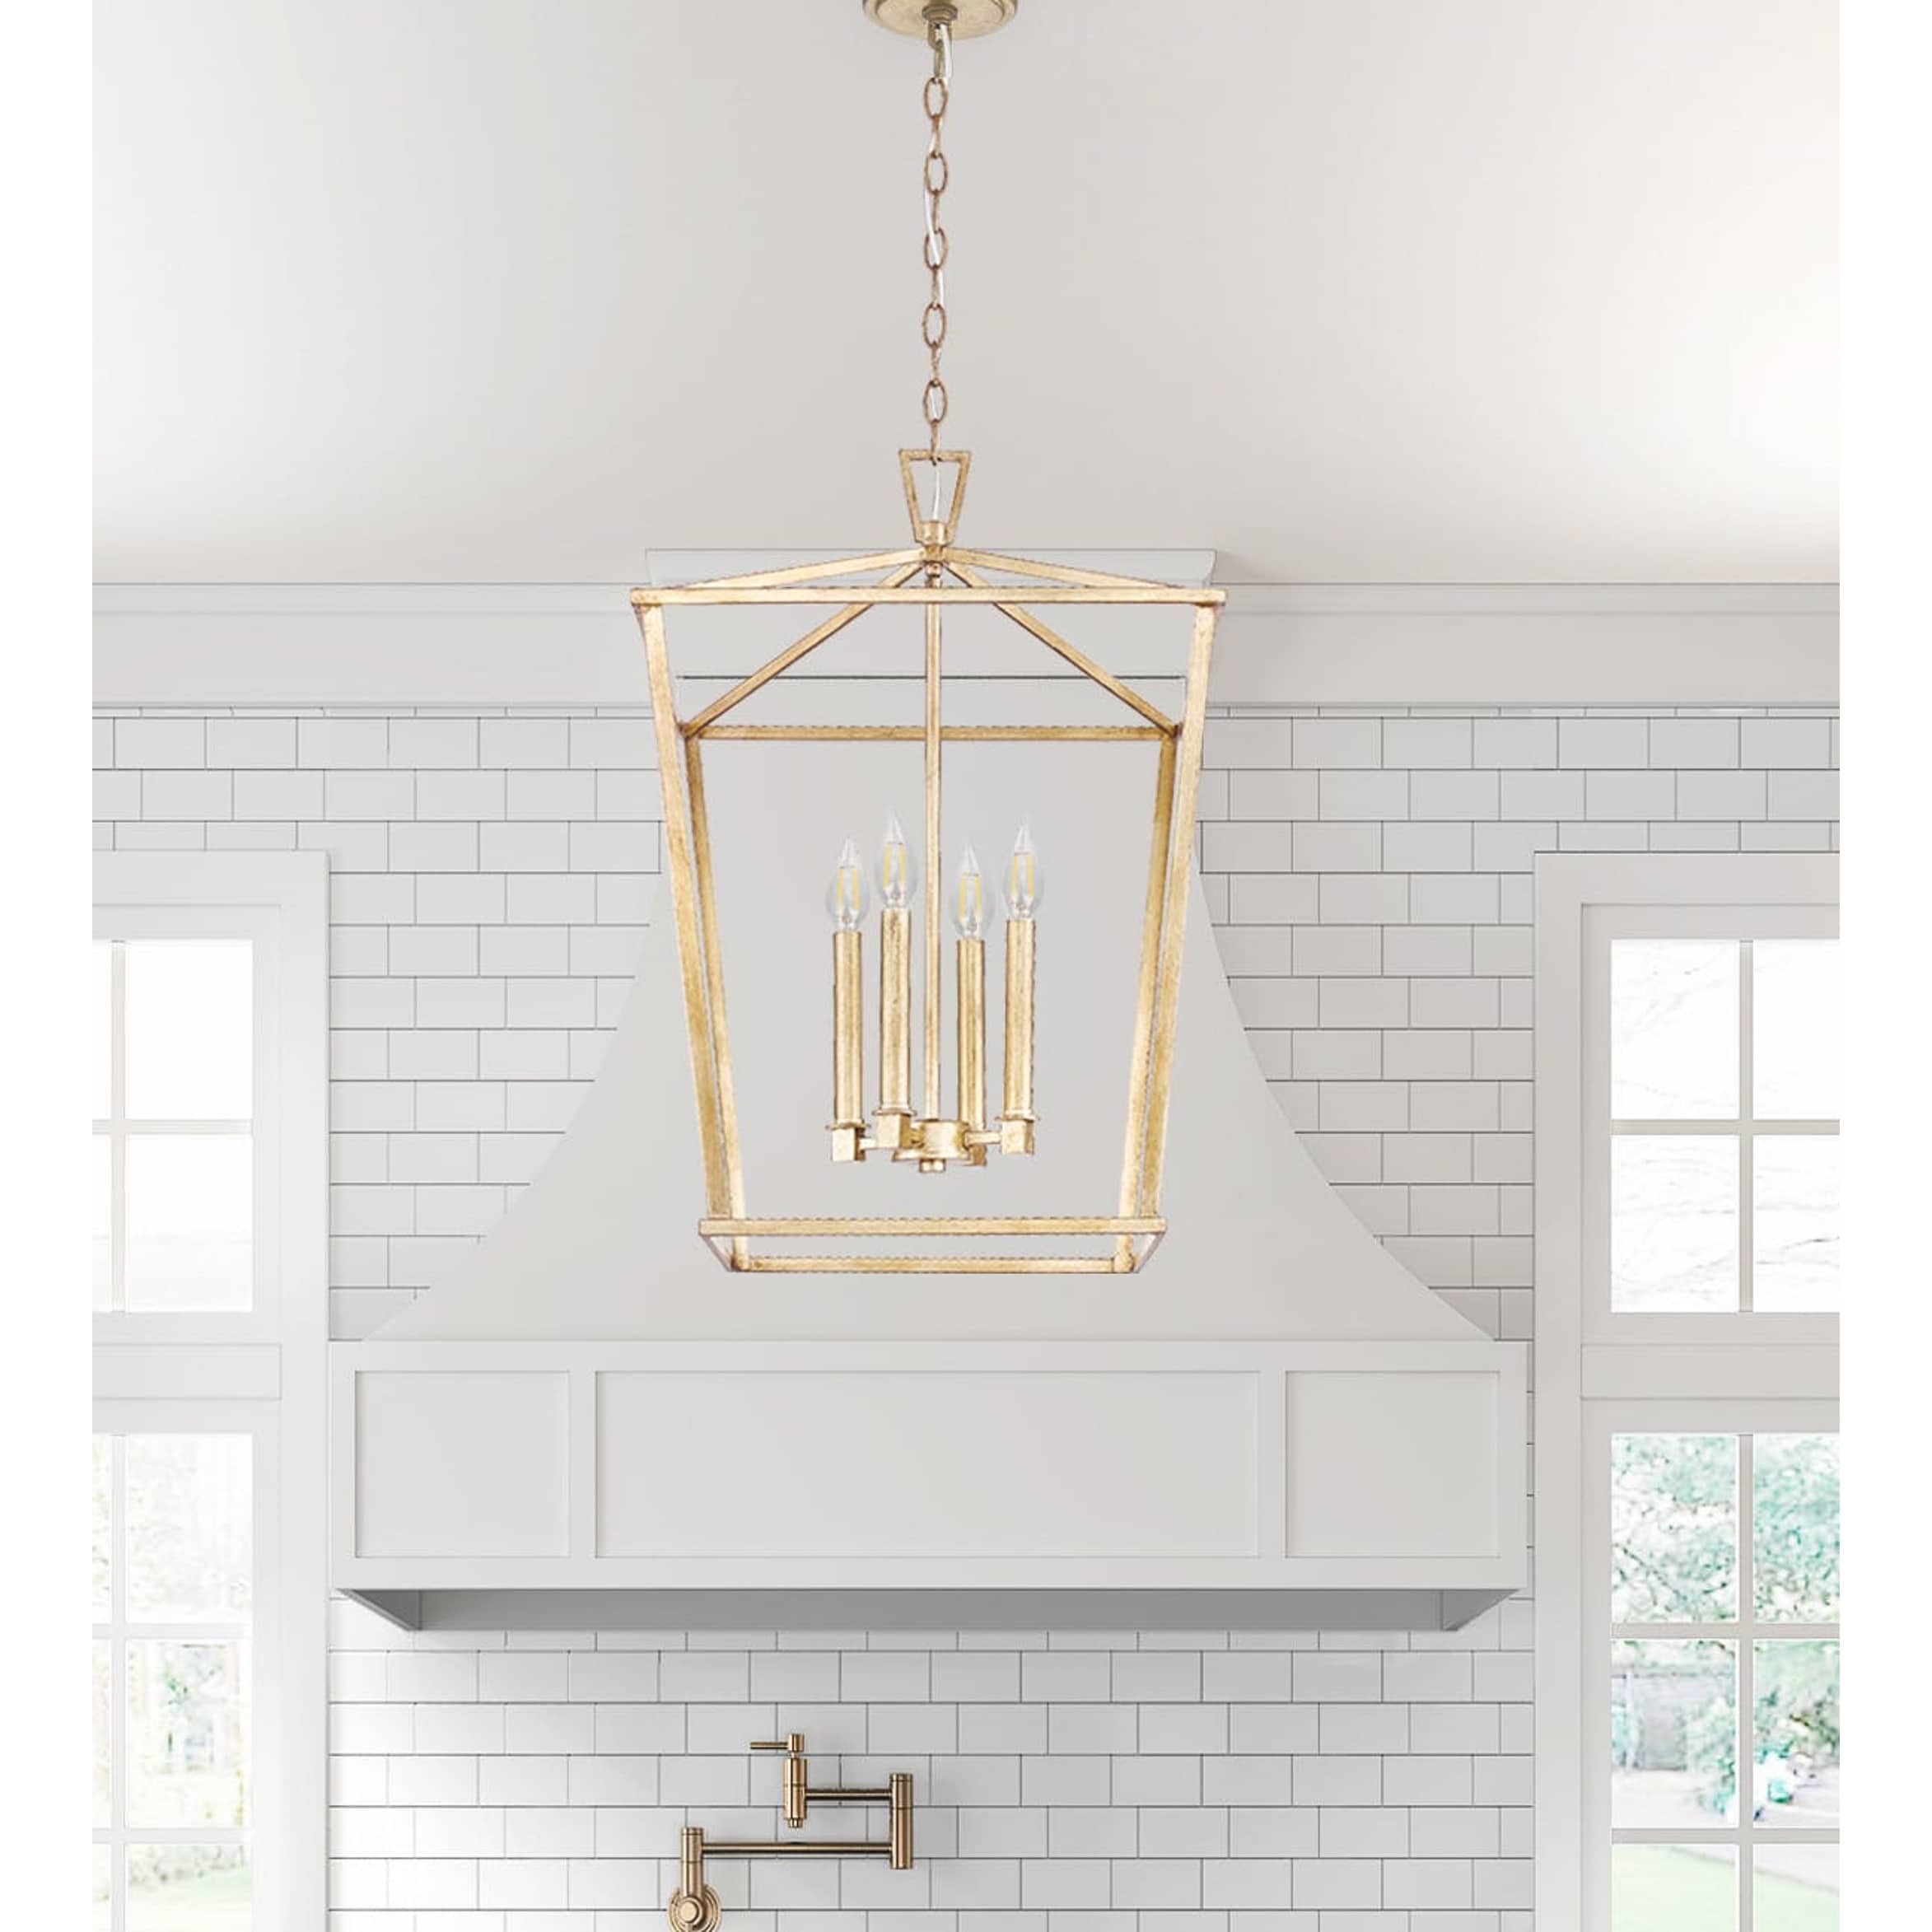 See Our Visual Comfort Darlana Lighting Up Close - Chrissy Marie Blog